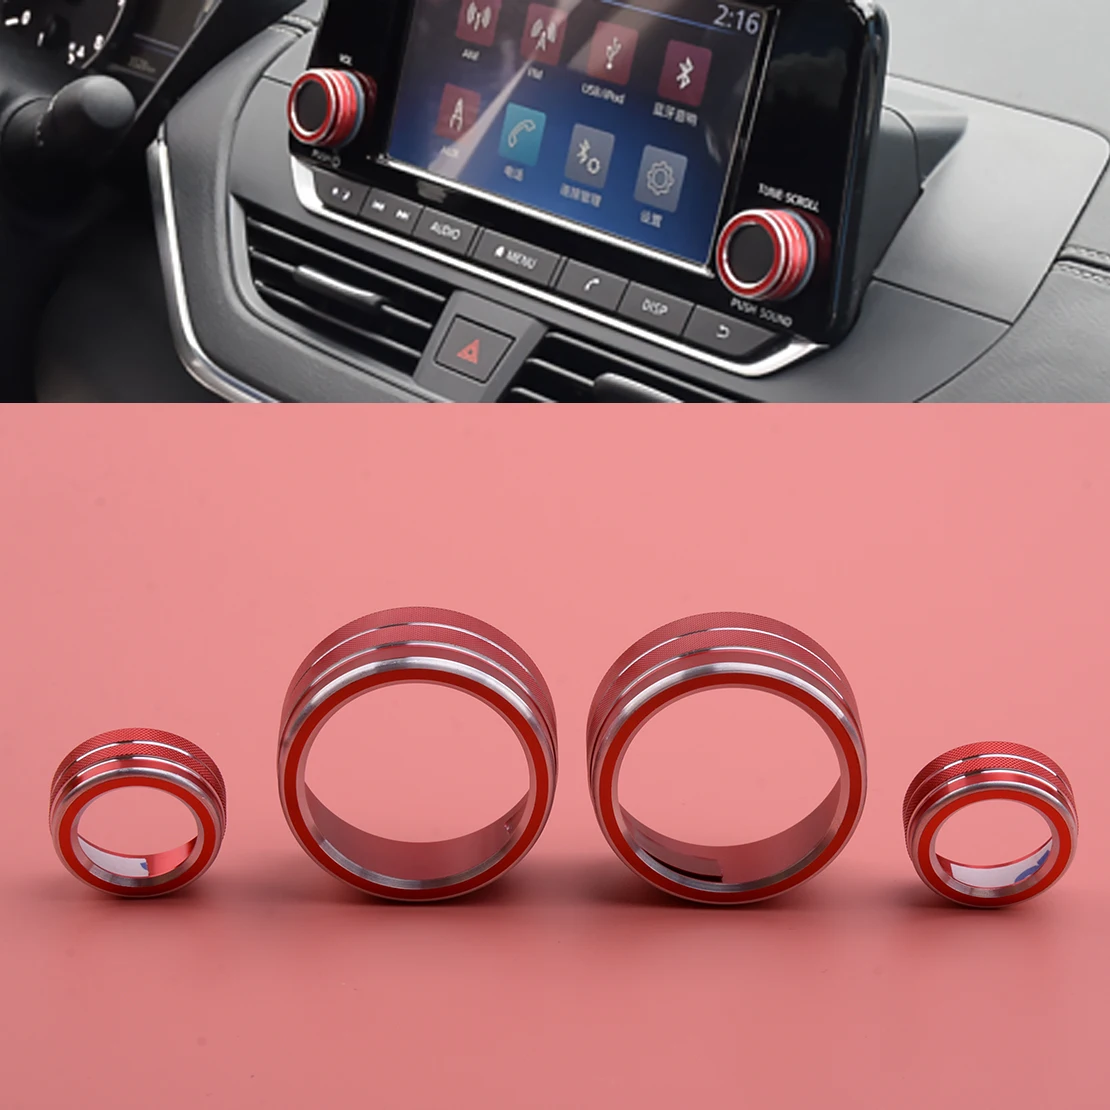 Bonbo for Dodge Challenger Charger Accessories 2015-2020 Air Conditioning Volume Radio Button Knob Cover Perfect for Decoration Decal Trim Rings Set of 3 Best Aluminum Alloy Bright Red 